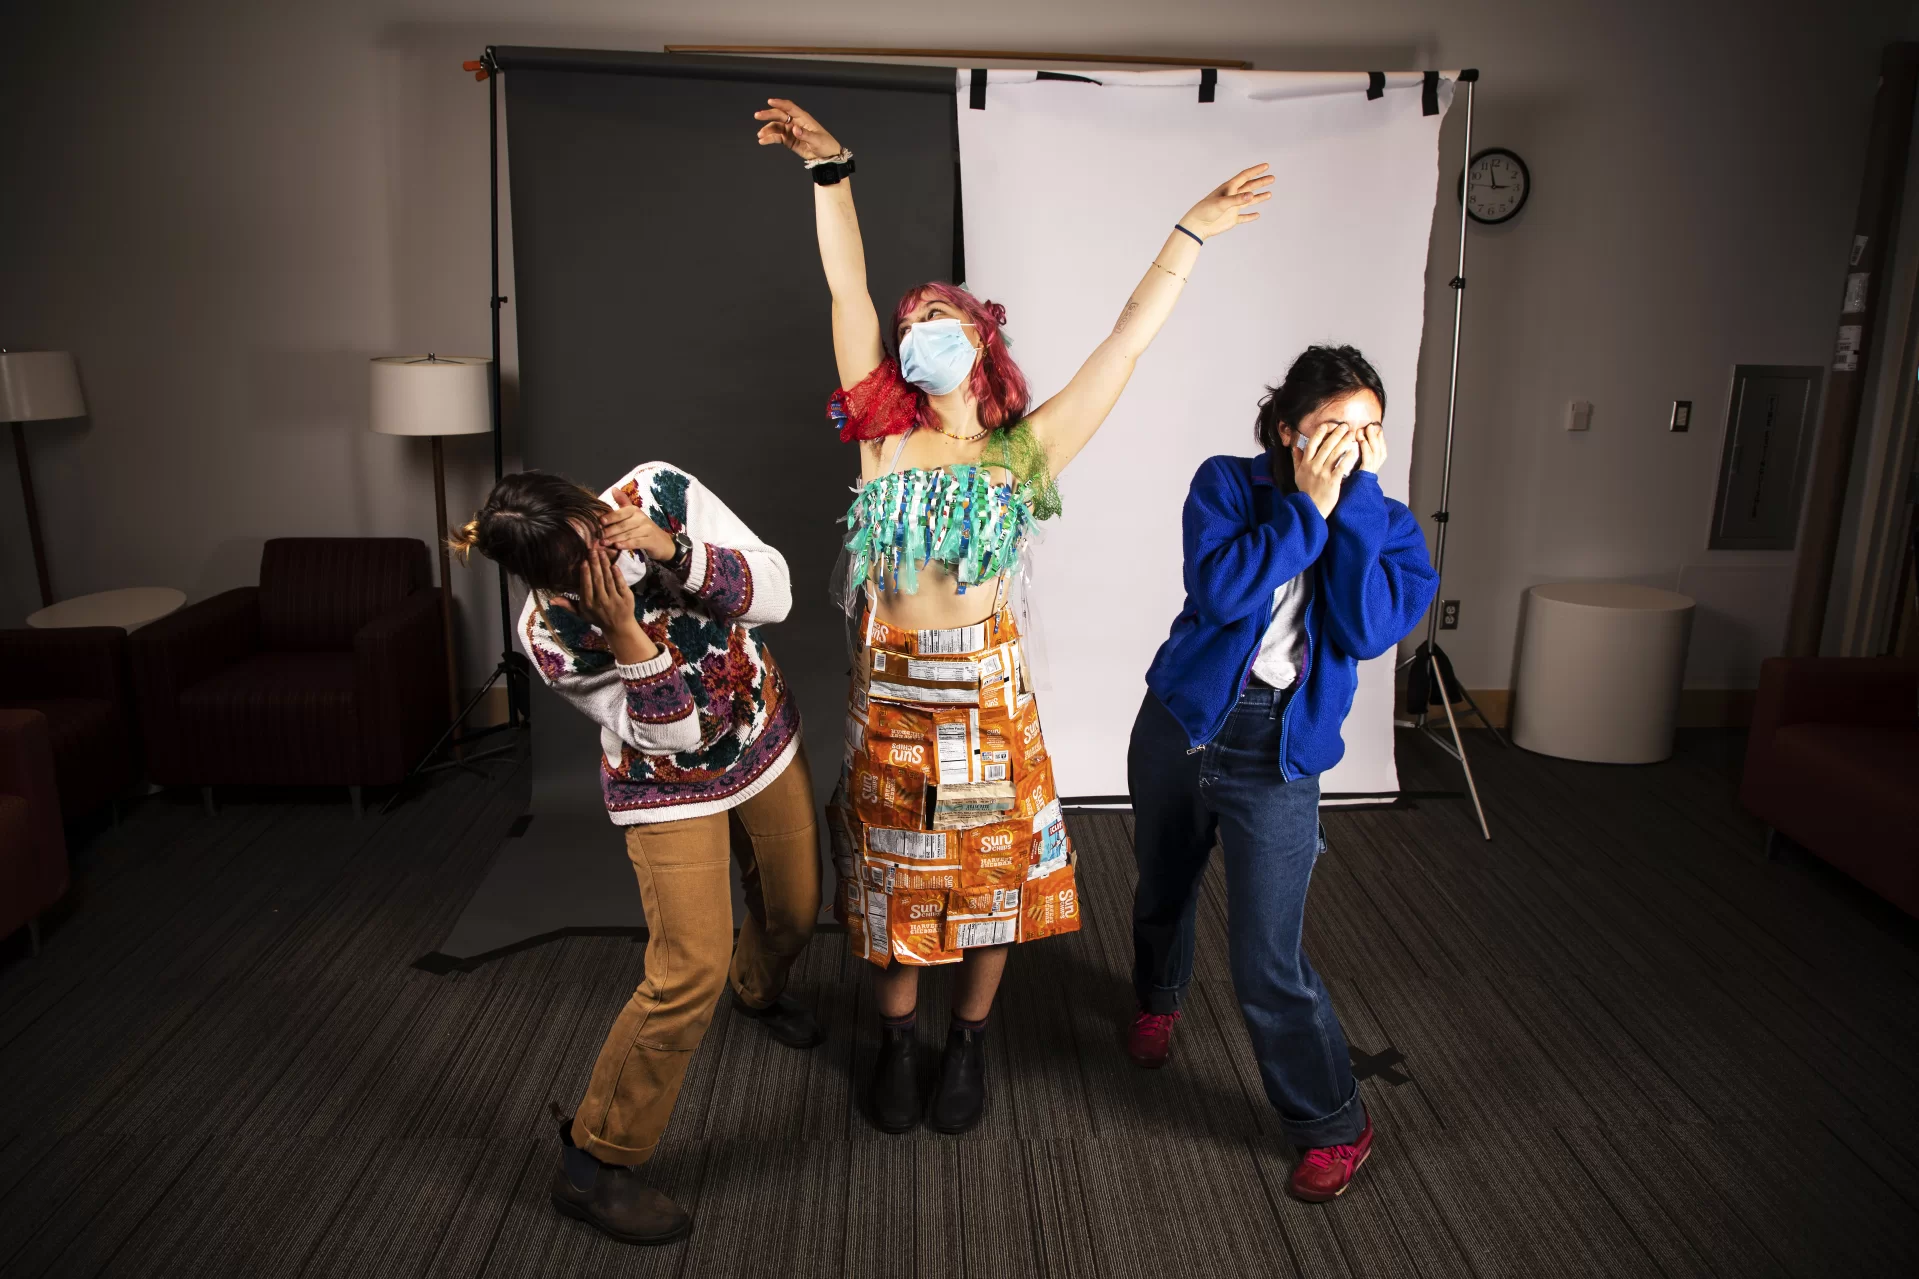 Adelle Welch ‘25 of Livingston, MT, Maria McEvoy ‘25 of Missoula, MT, and Izzy Borah ‘25 of Needham Heights, Mass., pose for portraits dressed in attire created for this years Trashion Show on November 12, 2021.